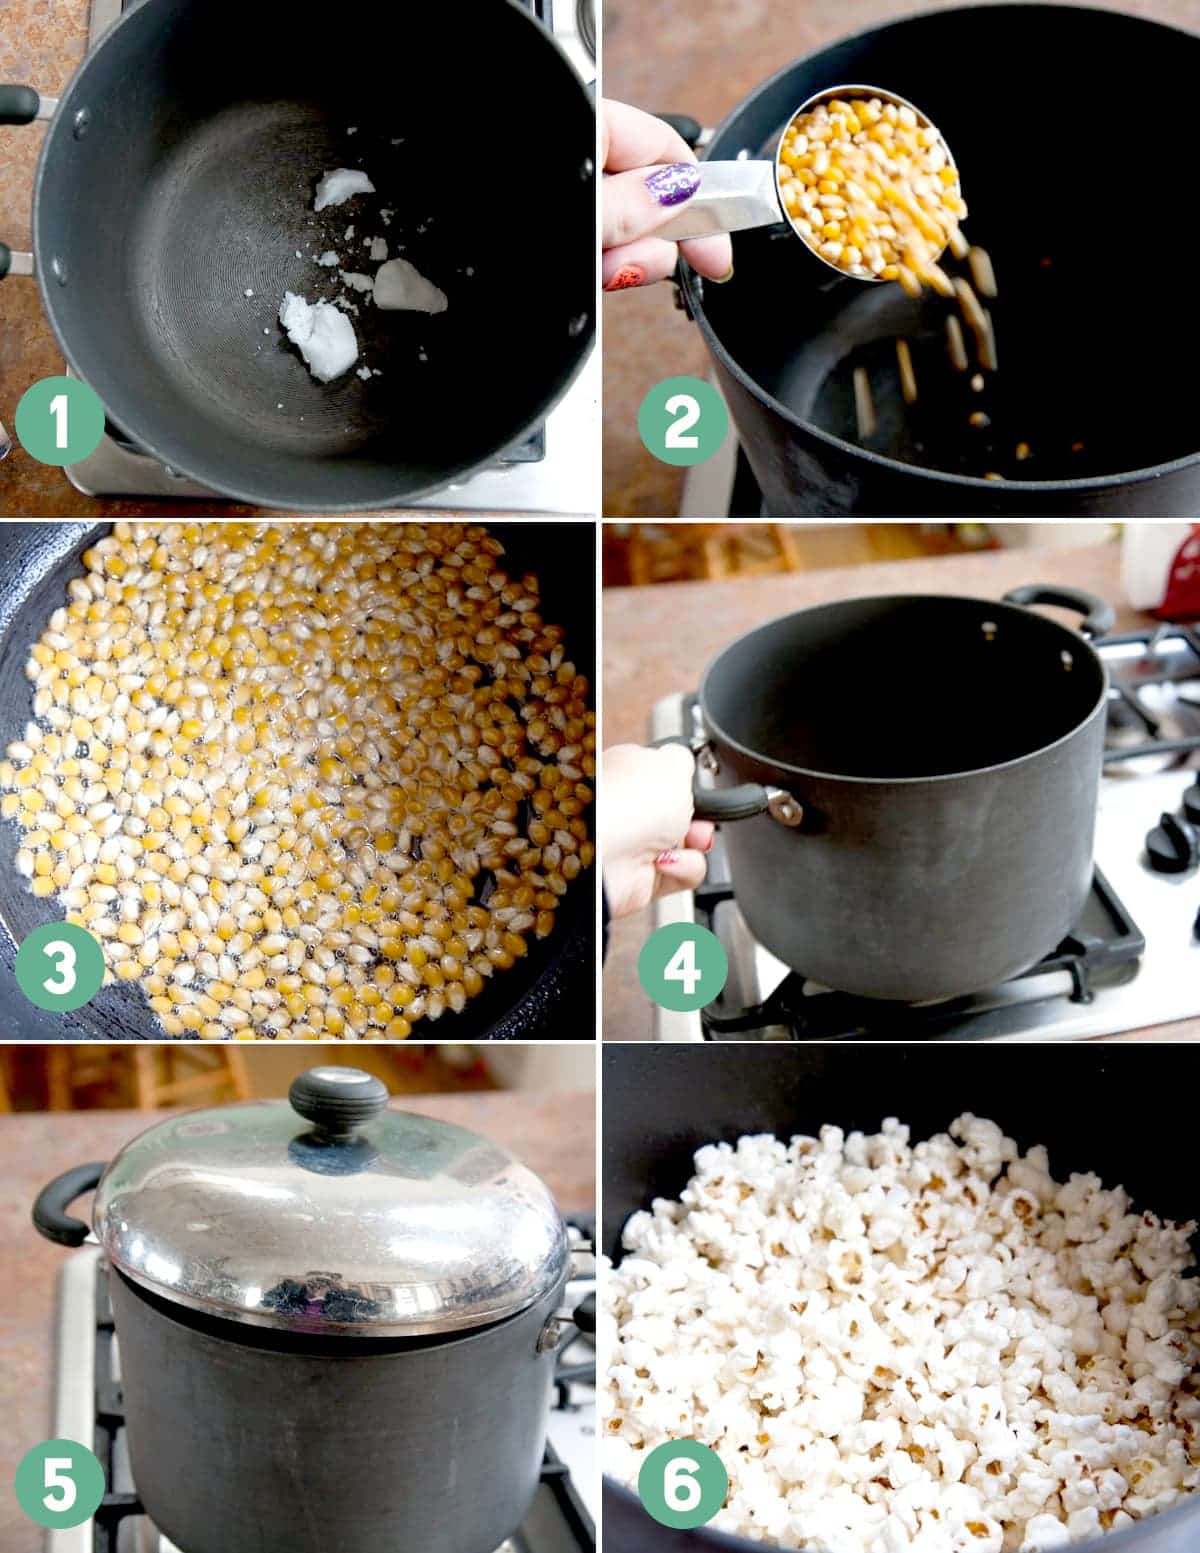 Numbered images show the steps for making popcorn on the stove.